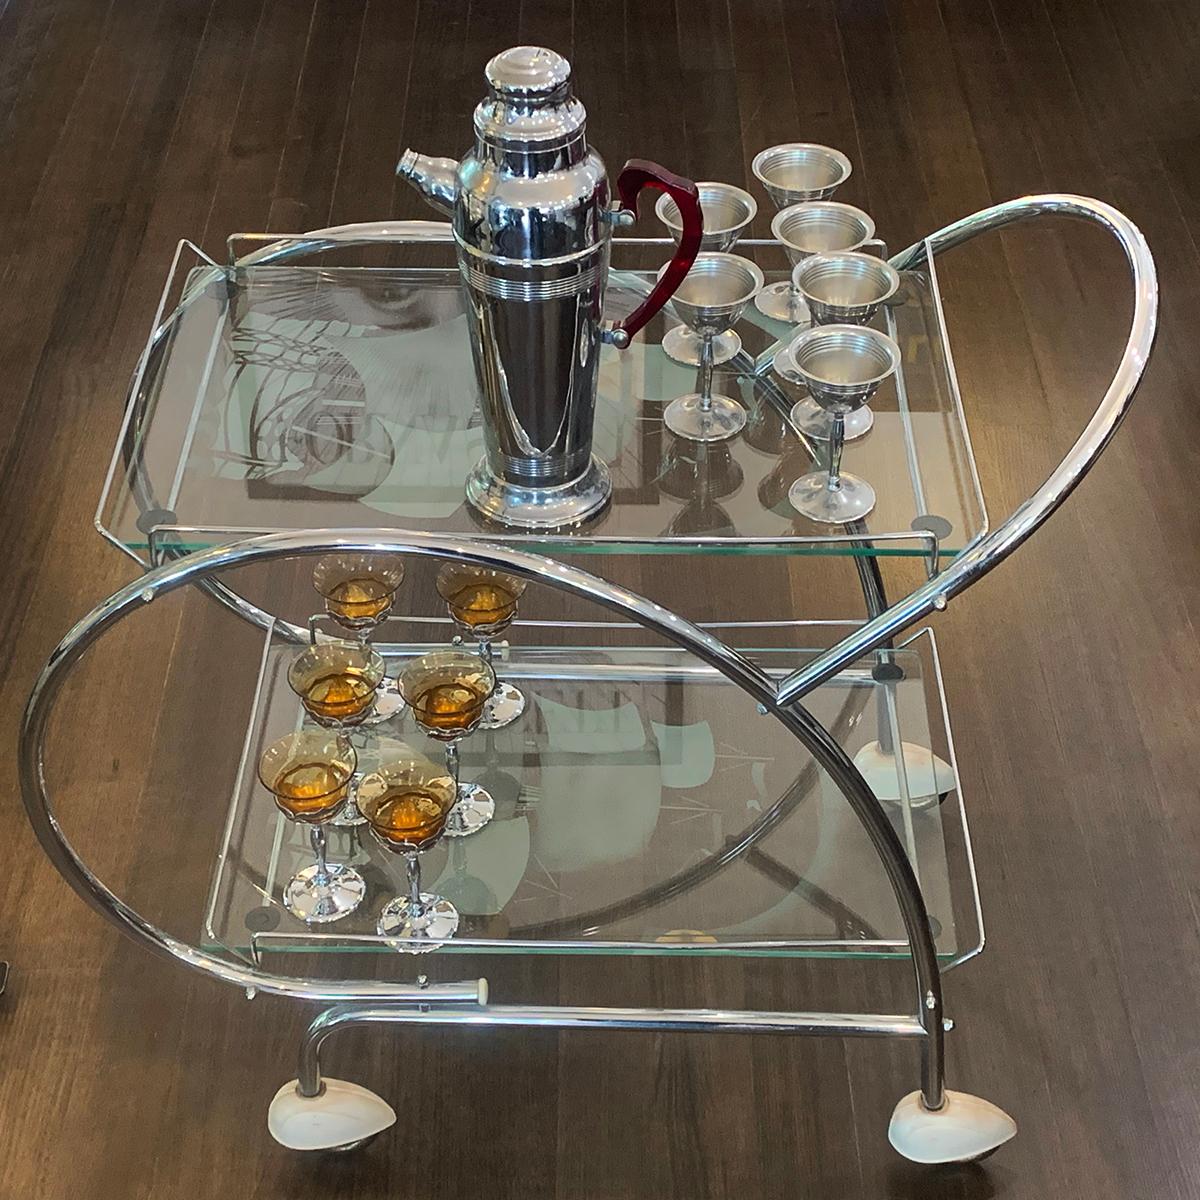 Spectacular, original Art Deco bar cart in Chrome with etched galleons on both glass shelves. Amazing original condition with a soft aged patina to chrome, and no wear to black rubber tyres. Negligible minor wear and no damage to report other than a